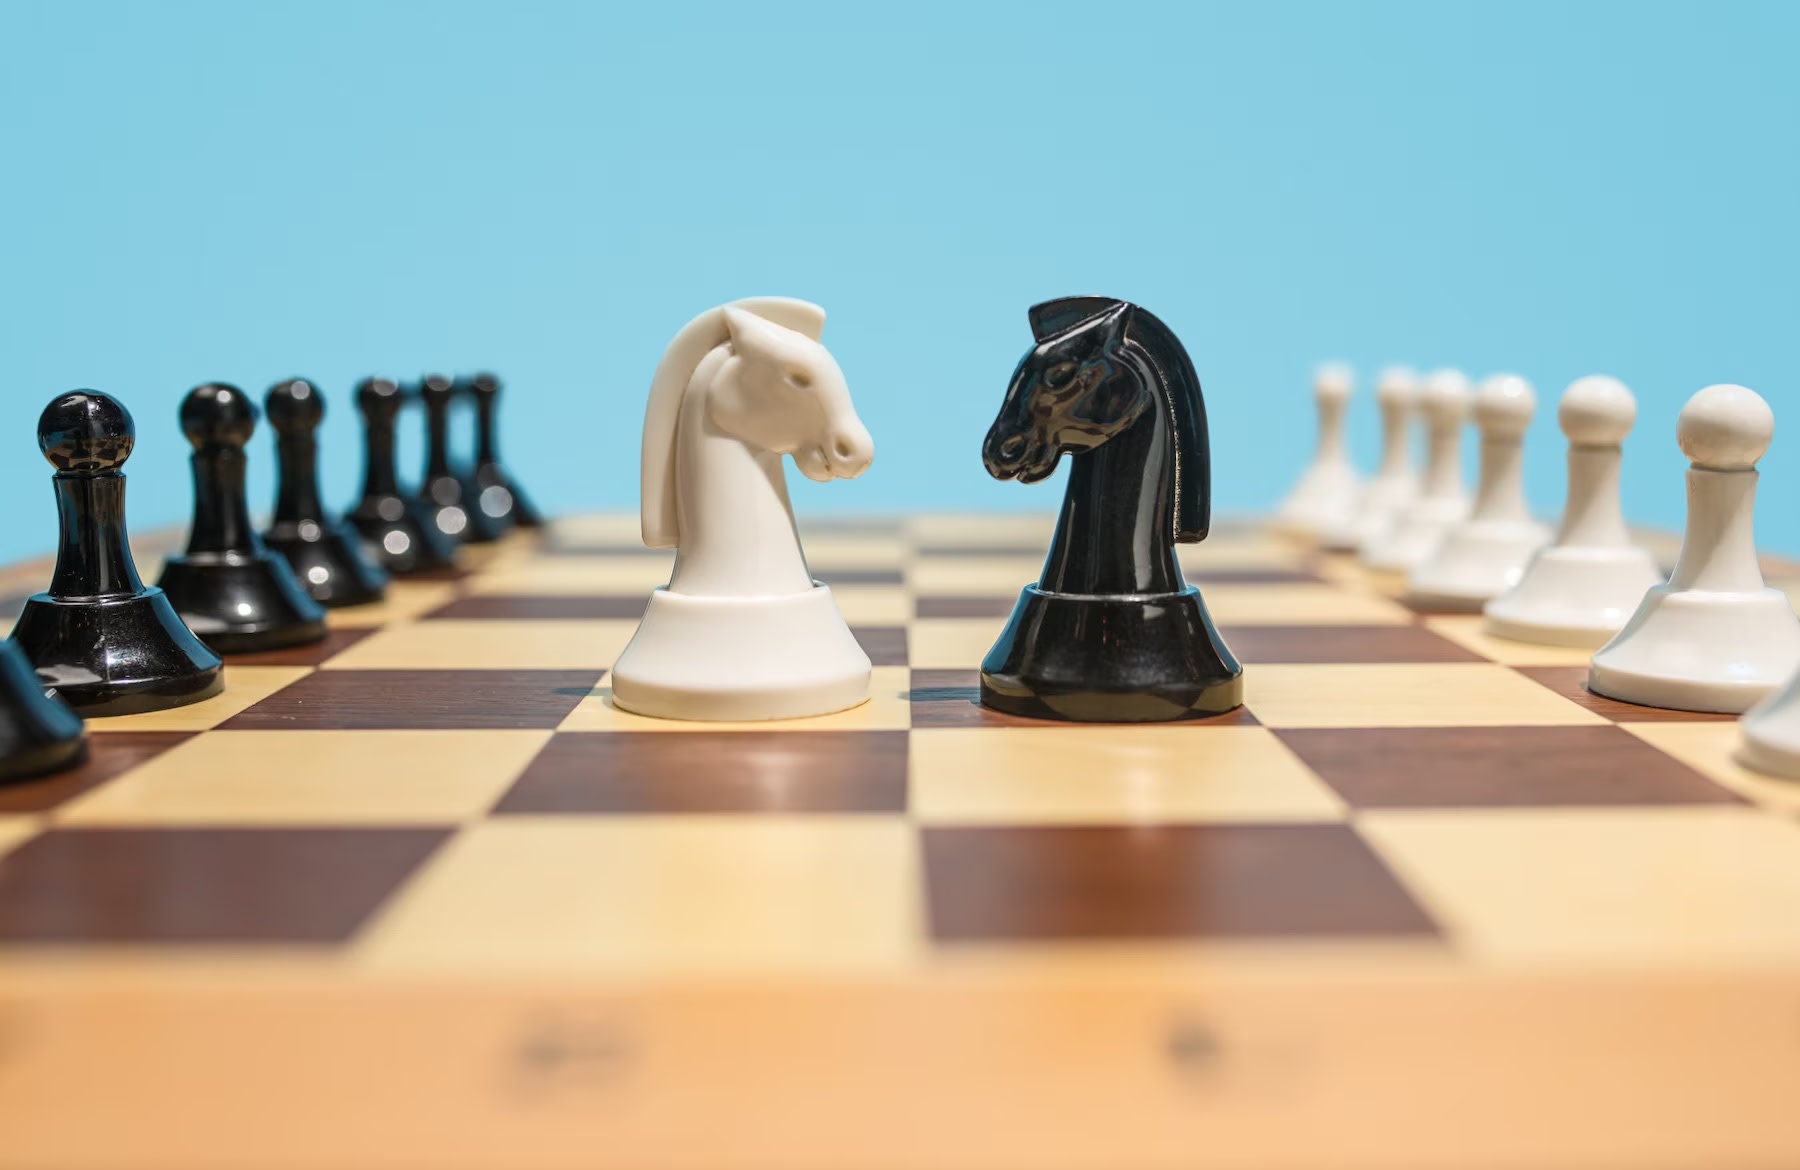 Image of opposing knights on chessboard competition 